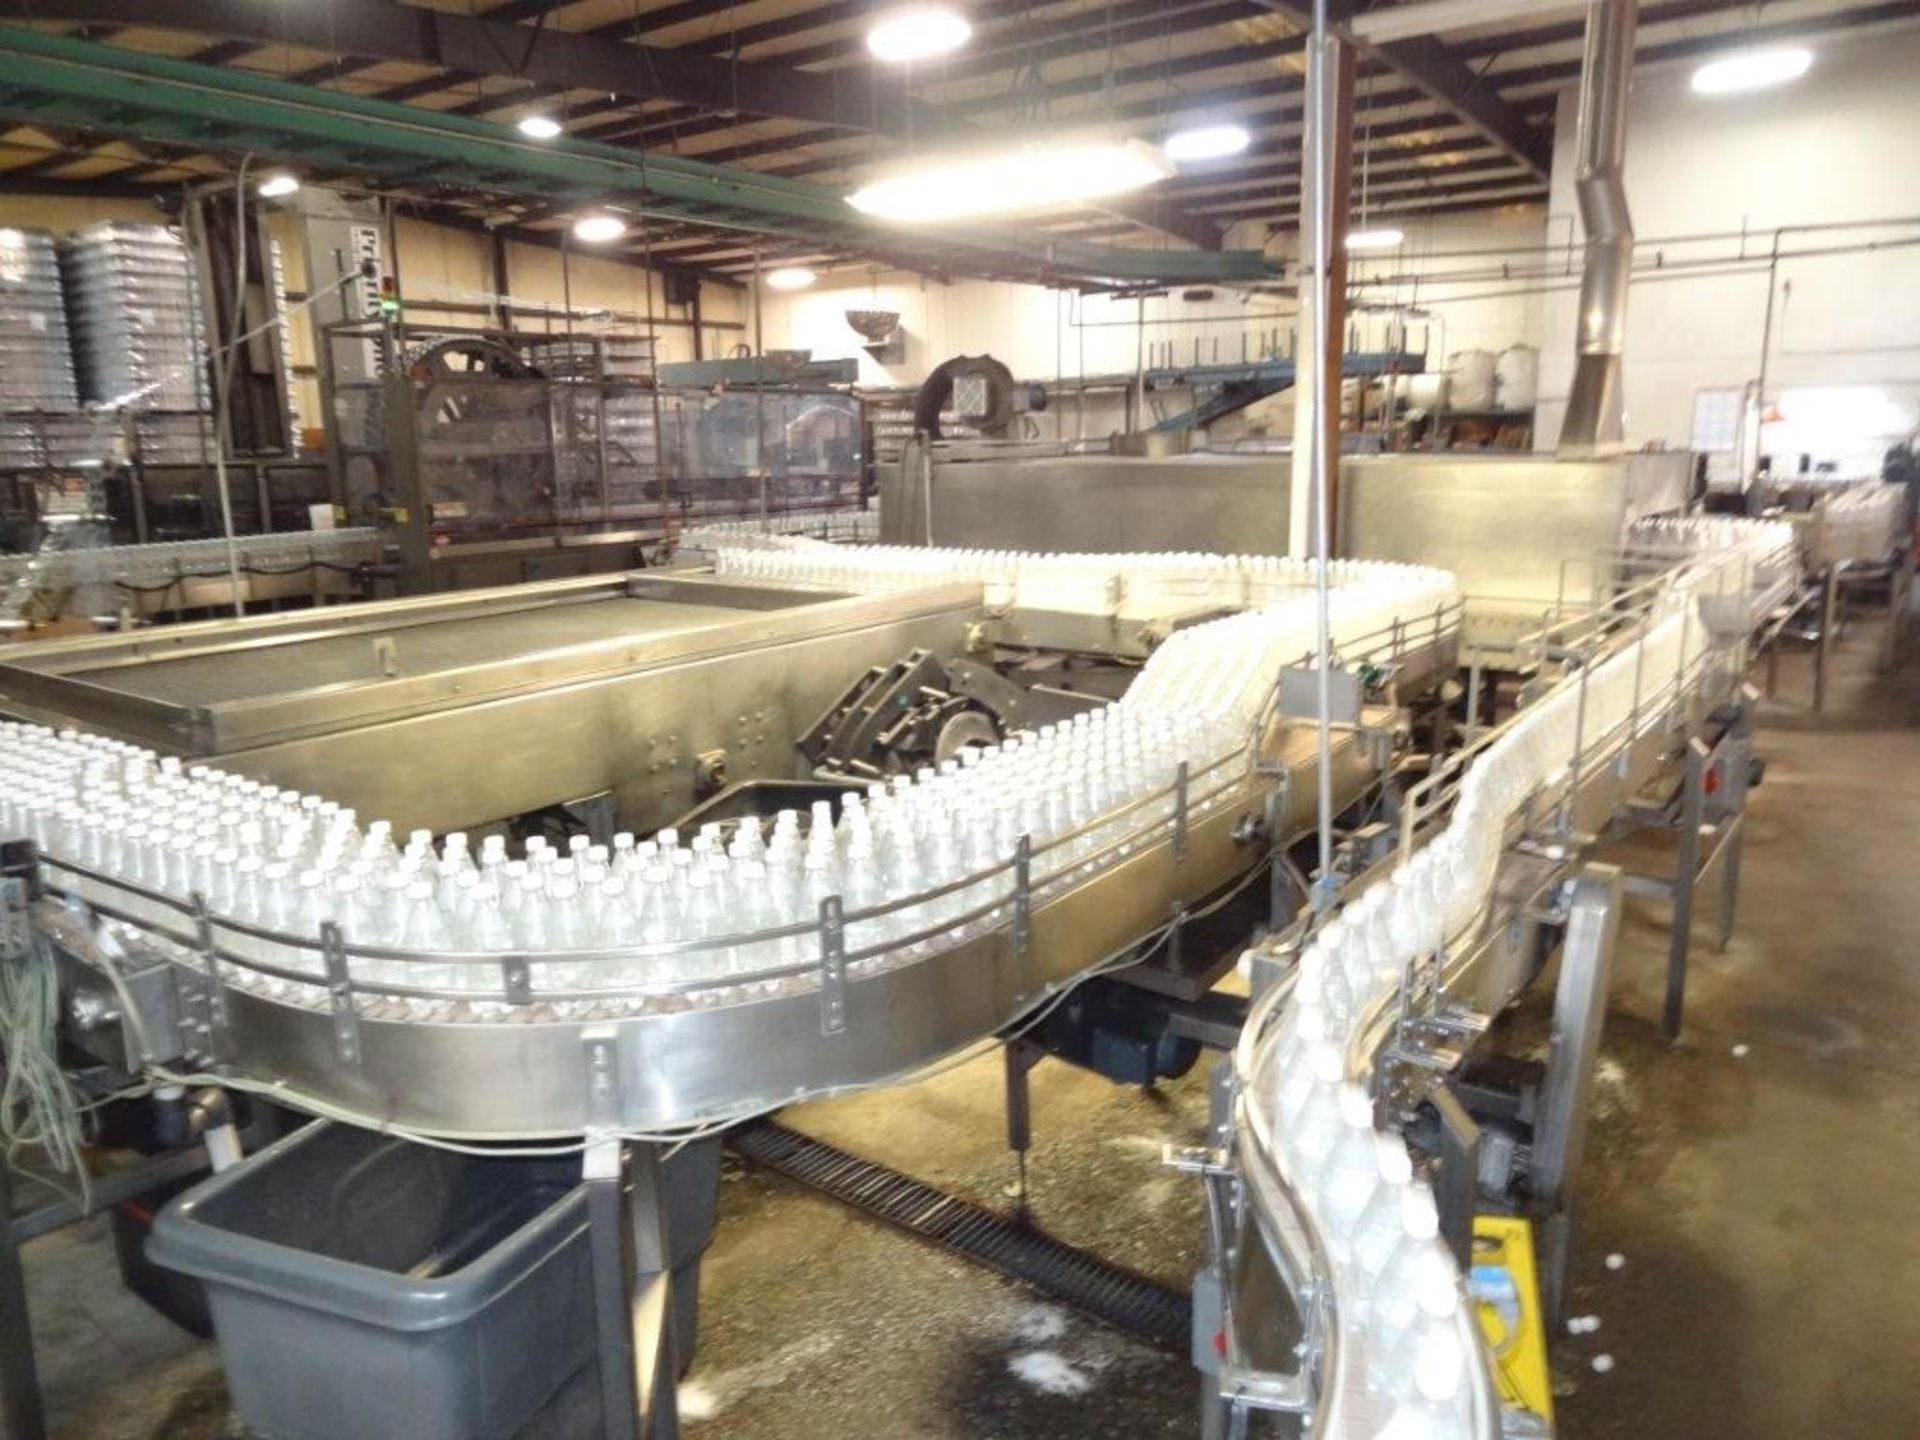 Stainless Steel Tabletop Conveyor Includes Pressure Style 18' Single Filer, Slow D | Rigging: $2000